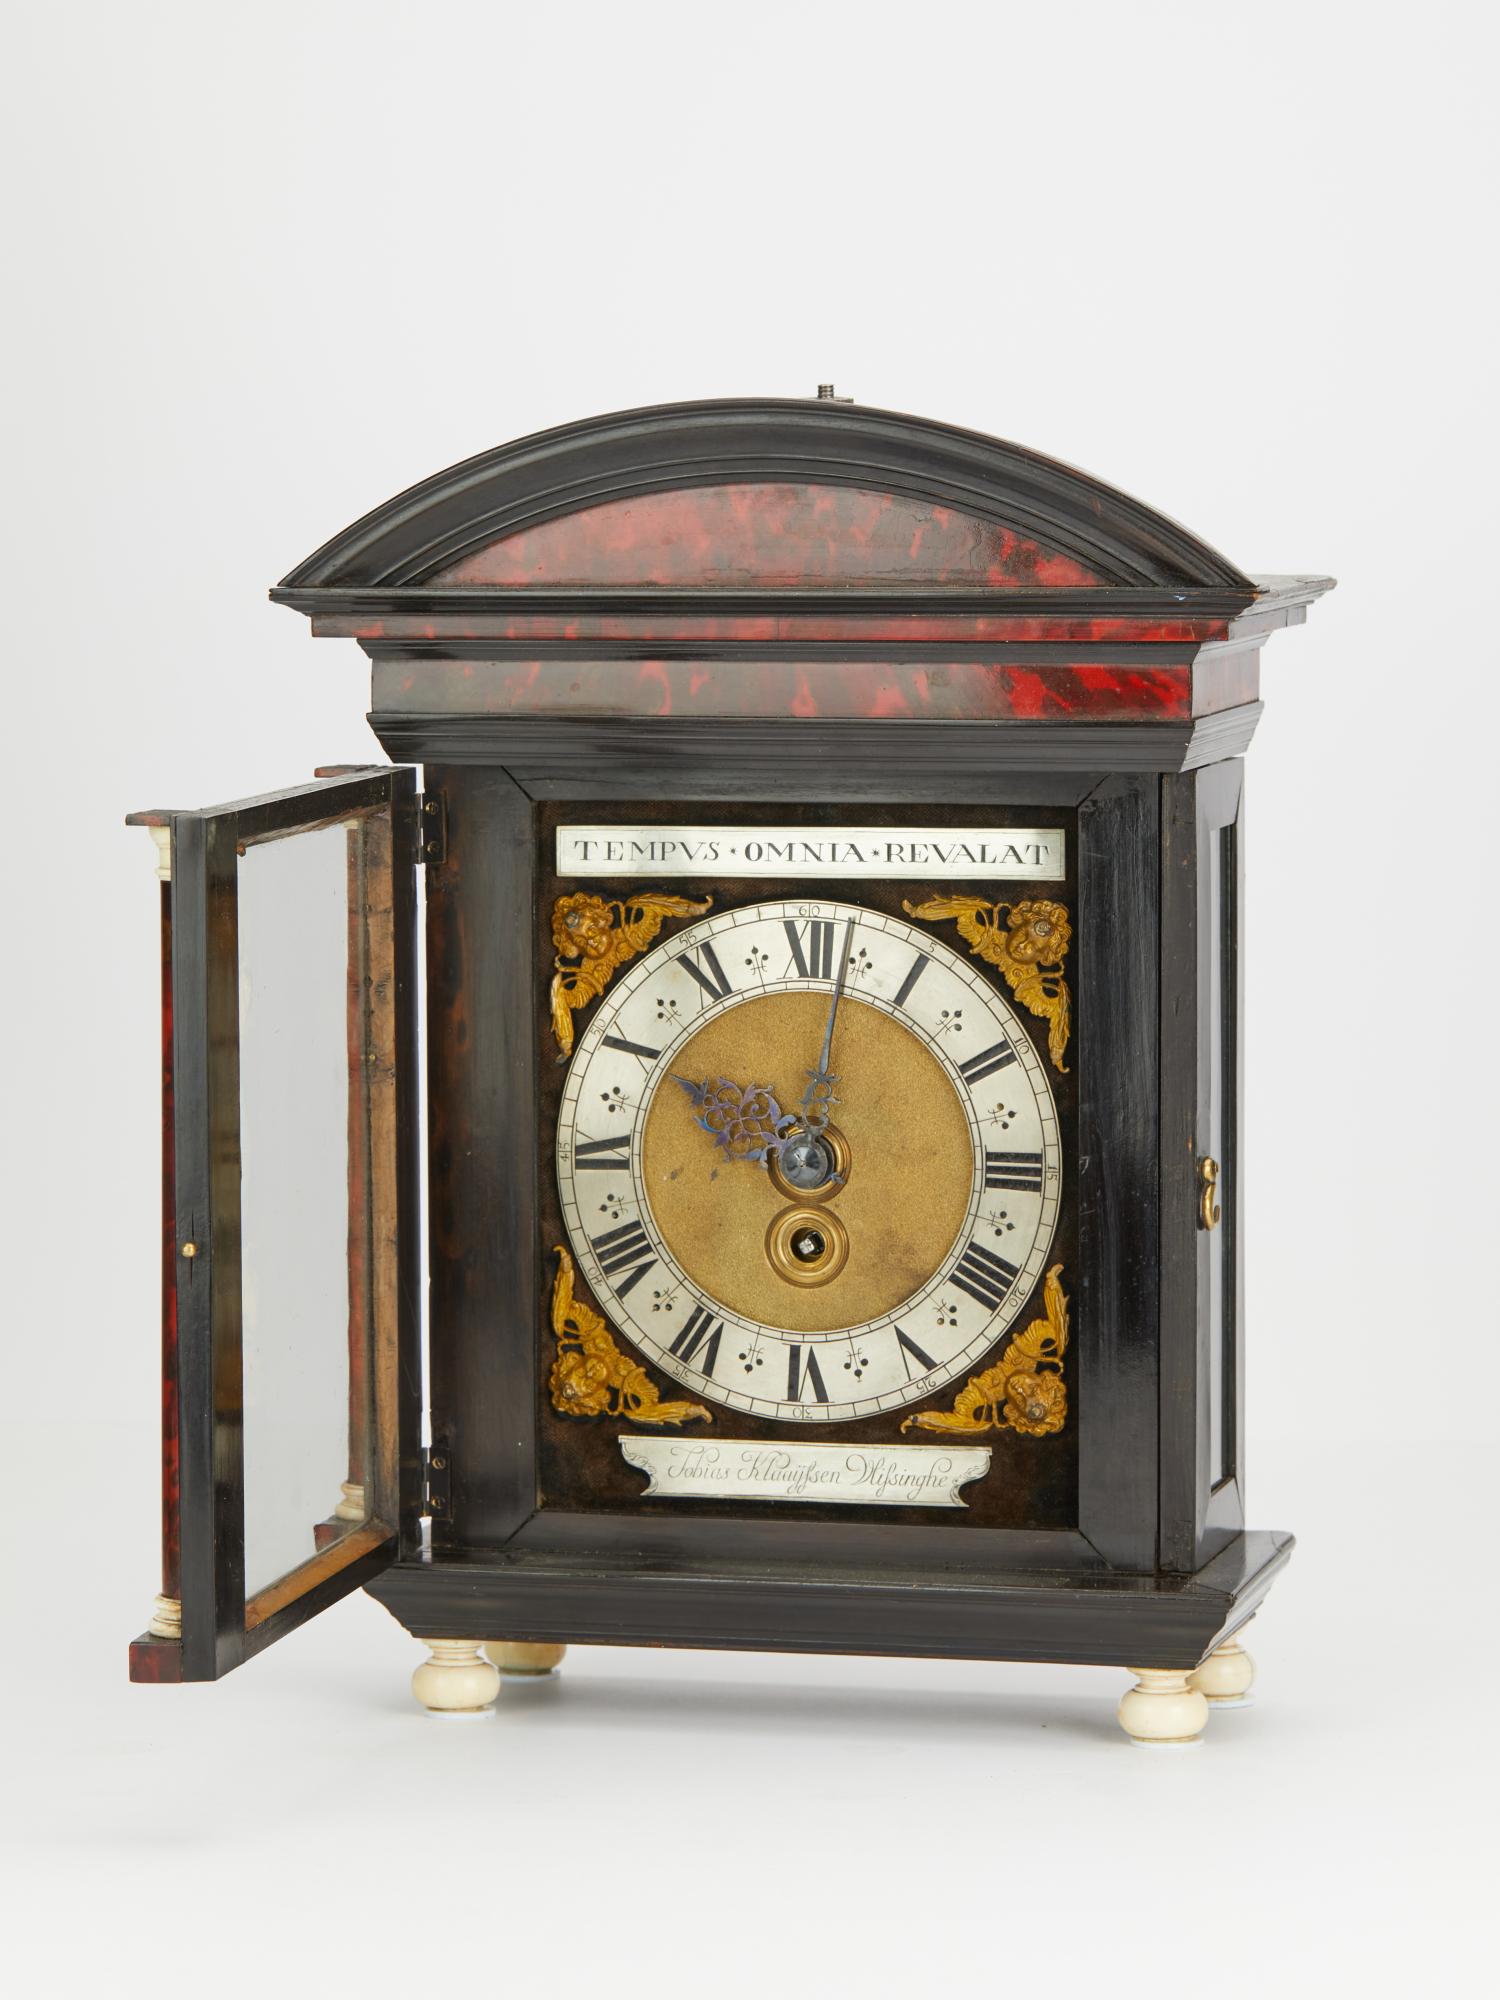 A tortoiseshell veneered Hague clock with elephant ivory mounted columns and ivory padfeet by Tobias Klaaijssen Vlissinghe. Completely checked and approved by Cites, declaration is available.